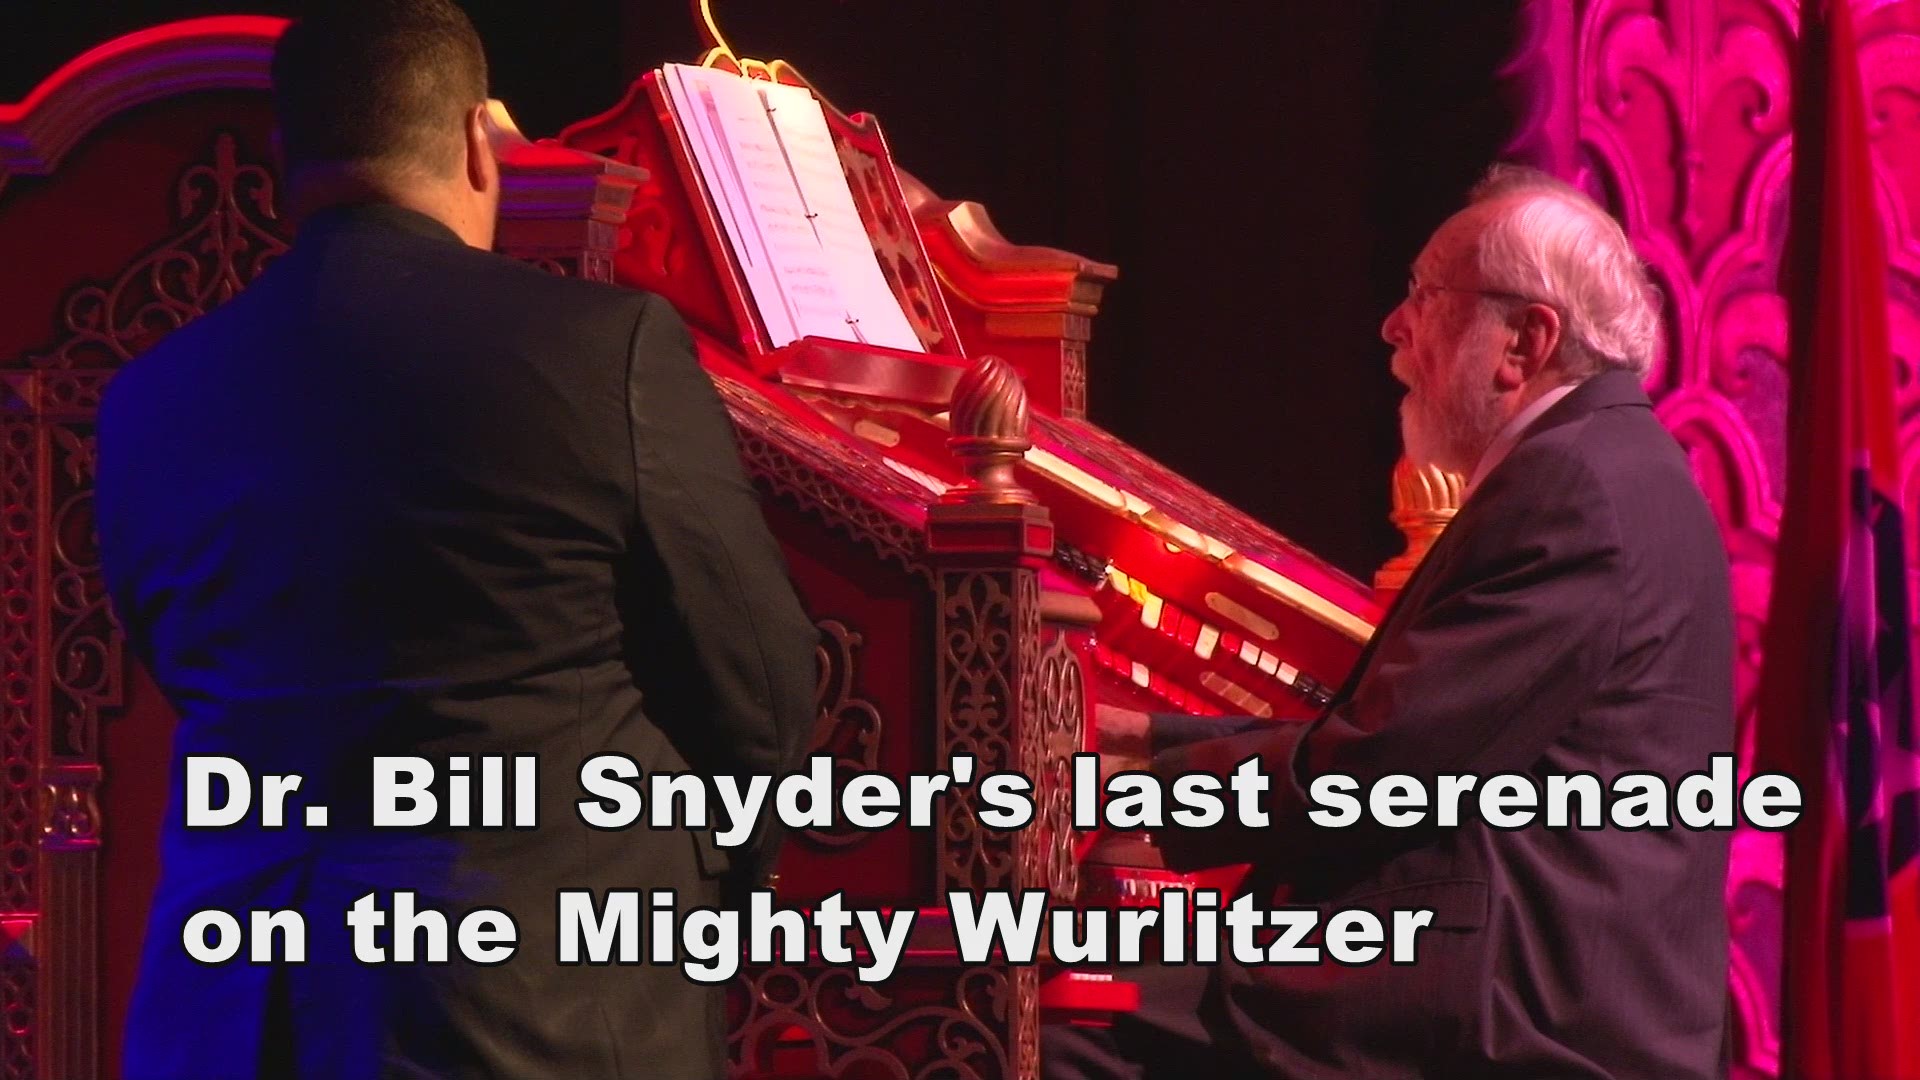 Dr. Bill Snyder plays the Tennessee Waltz on the Mighty Wurlitzer at the Tennessee Theatre